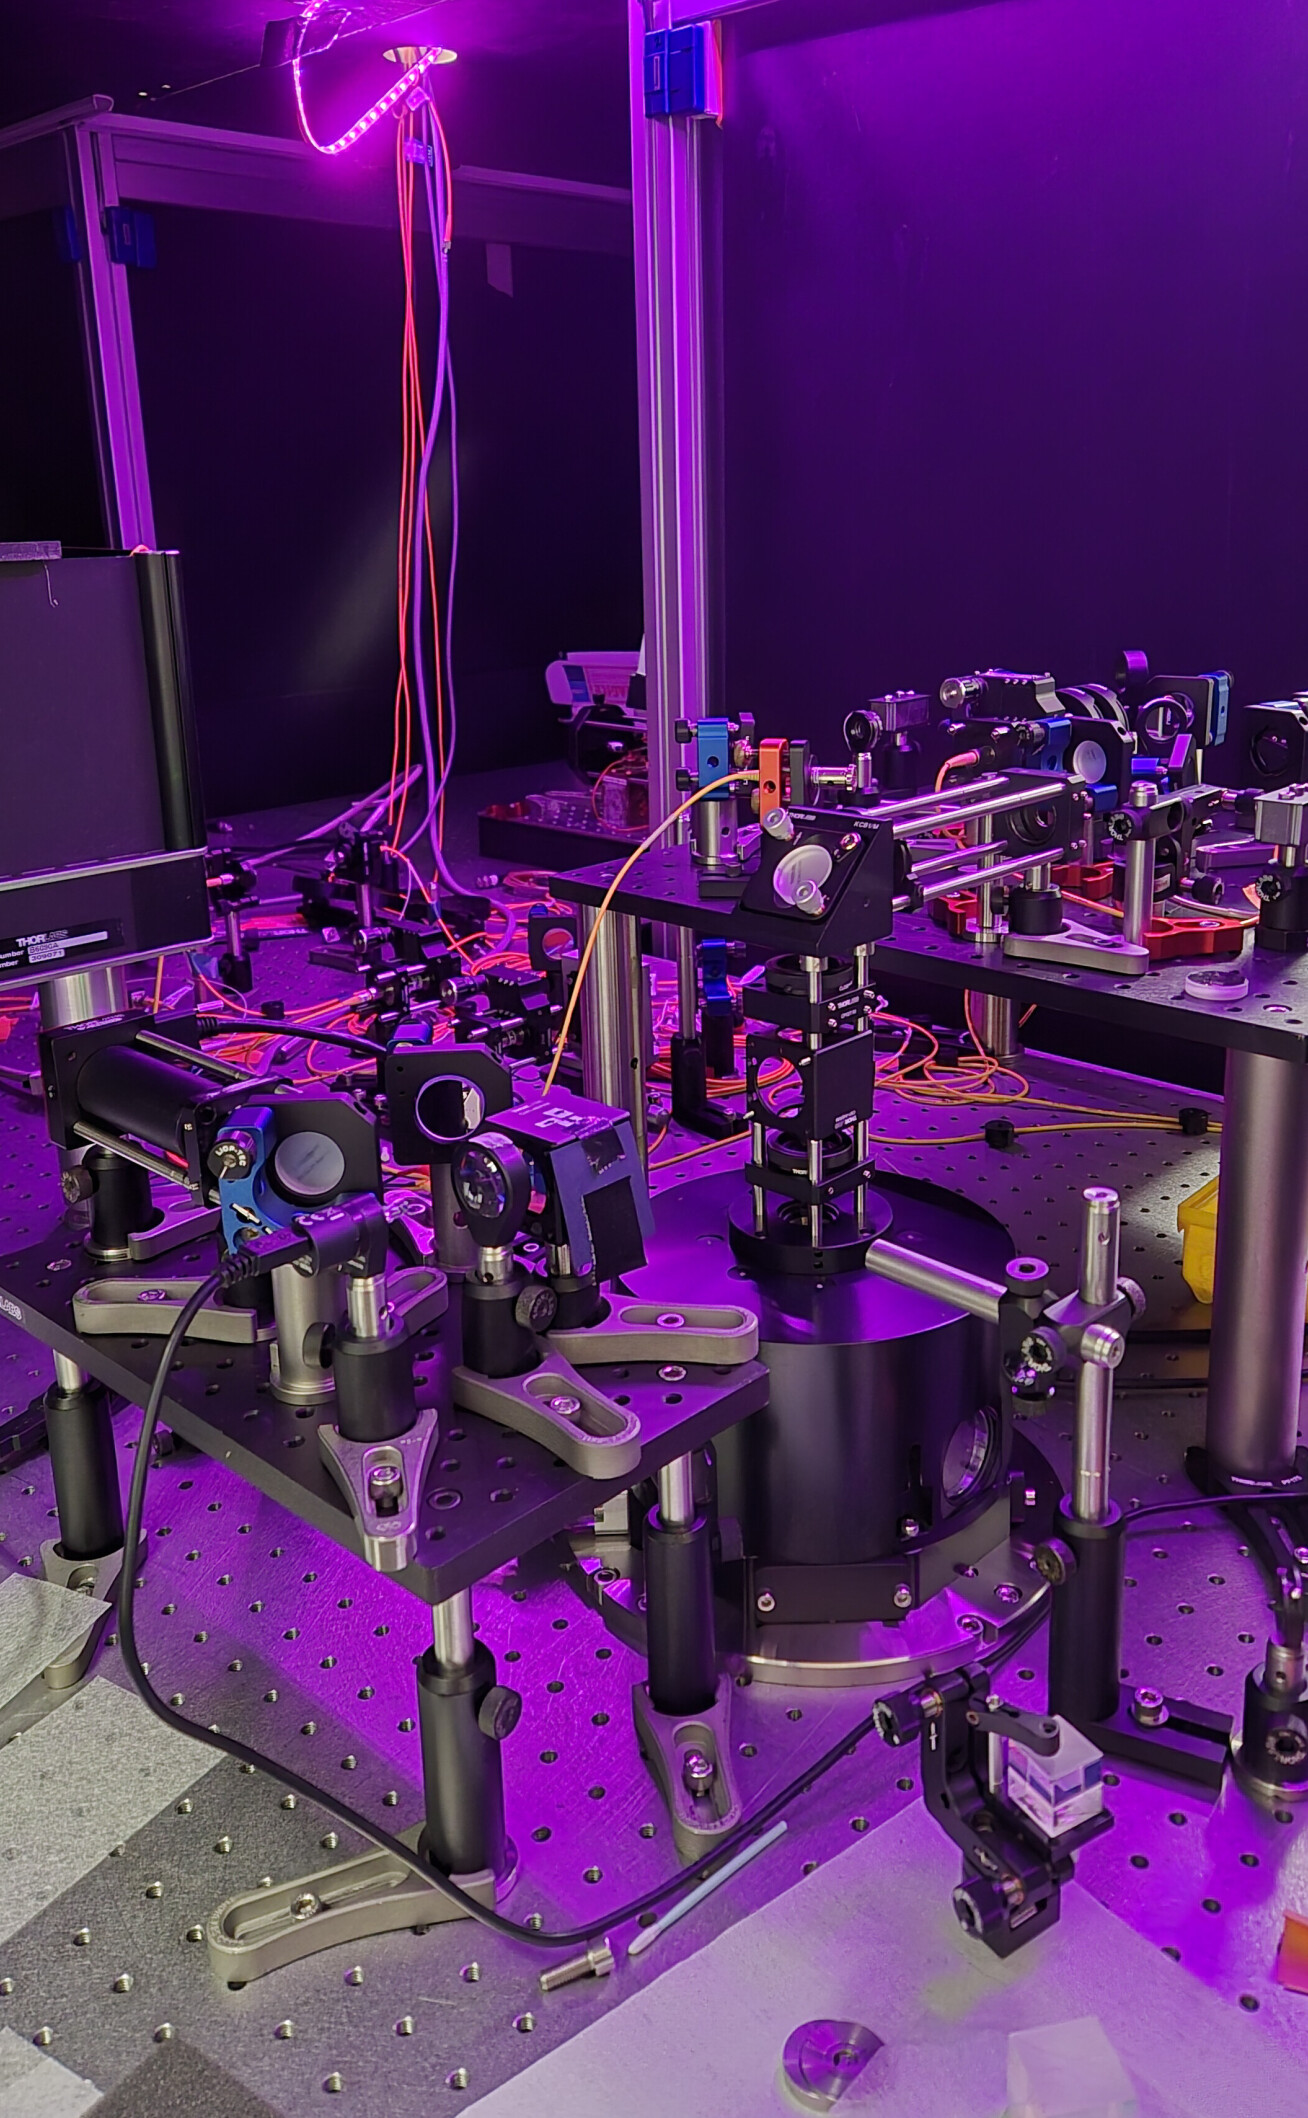 Optics and other equipment in purple light